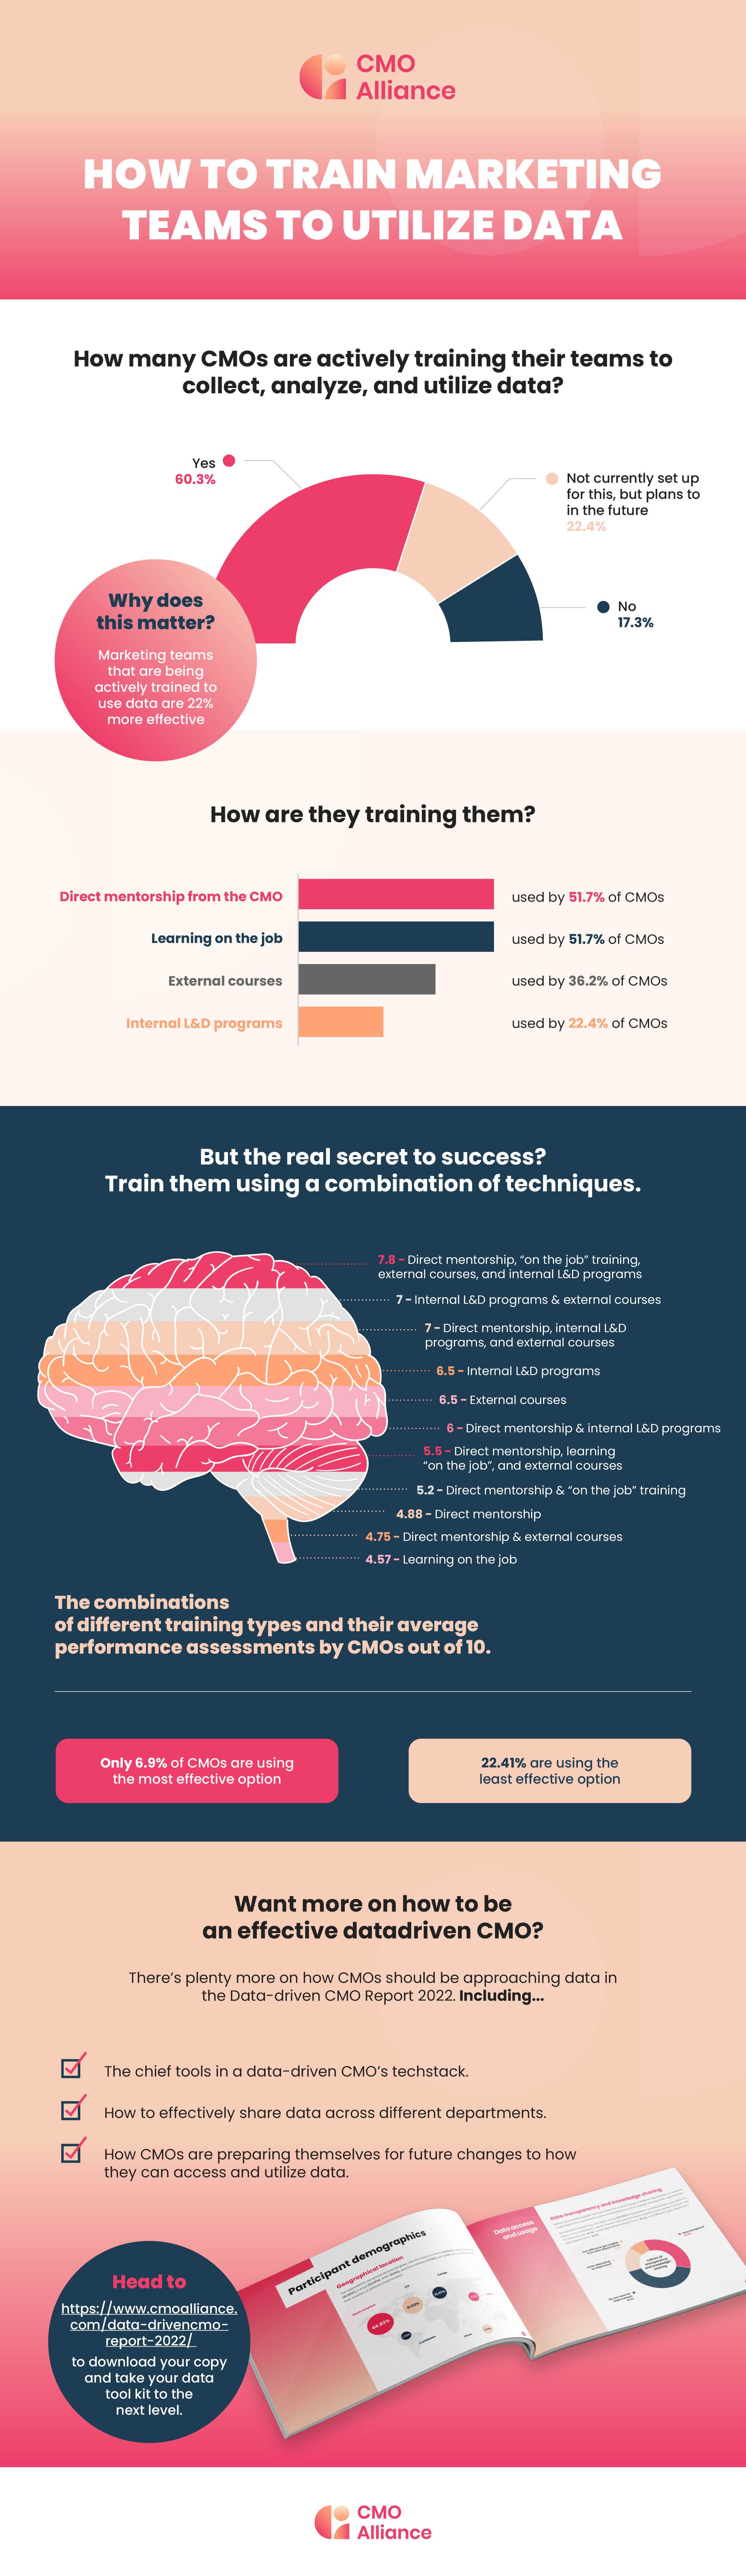 Infographic on how CMOs can train their teams to utilize data.